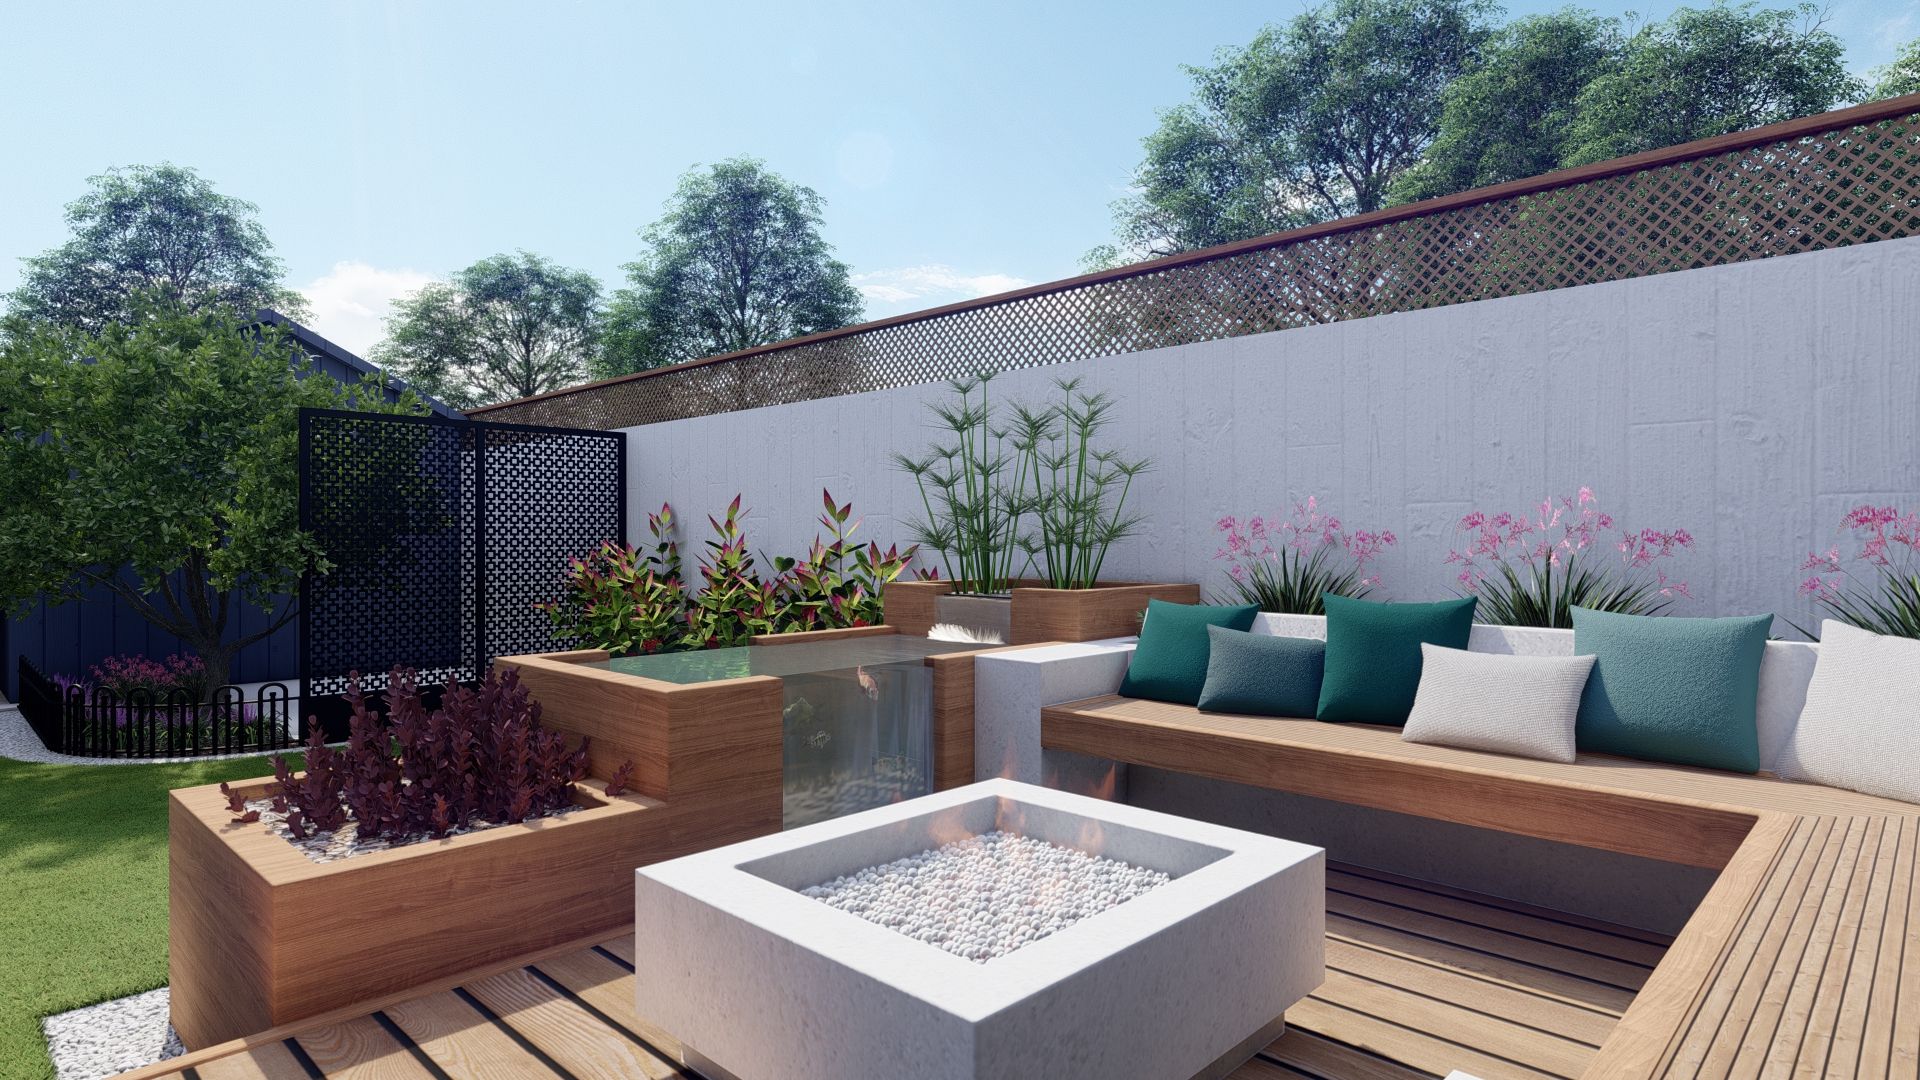 seating on a deck with potted plants and an outdoor fish tank as a center focal point